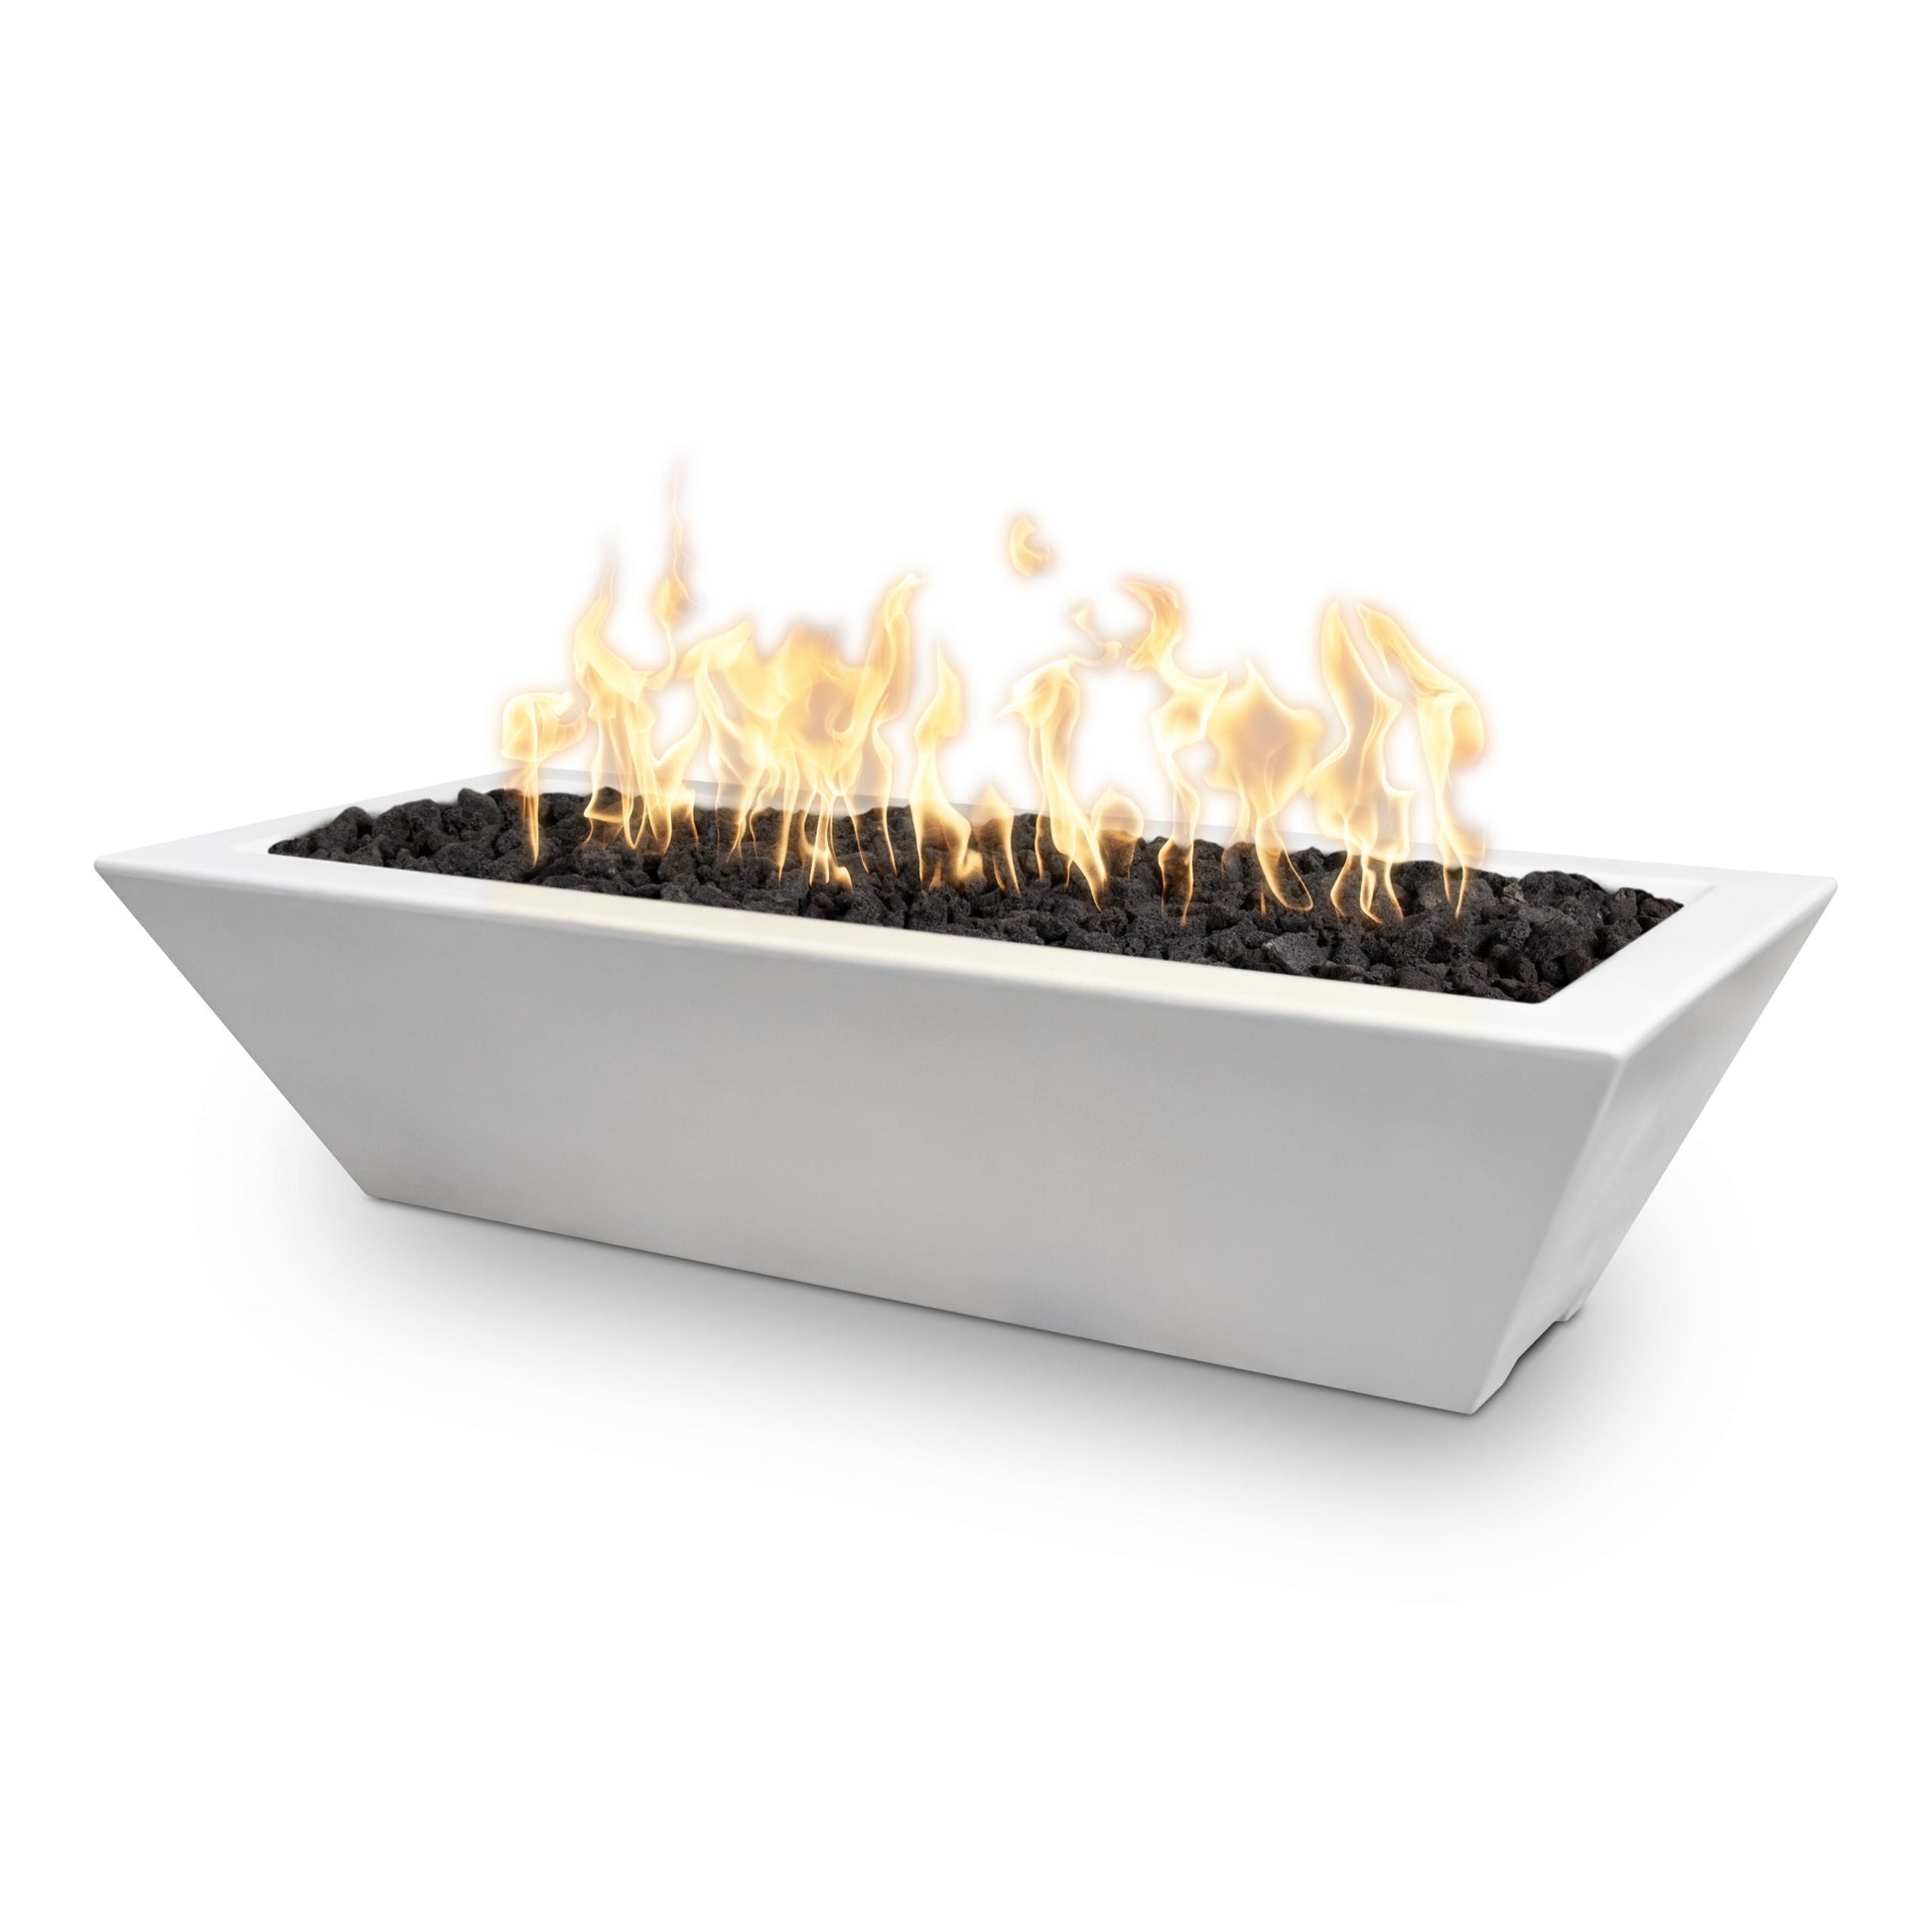 The Outdoor Plus Linear Maya 72" Chocolate GFRC Concrete Liquid Propane Fire Bowl with 12V Electronic Ignition